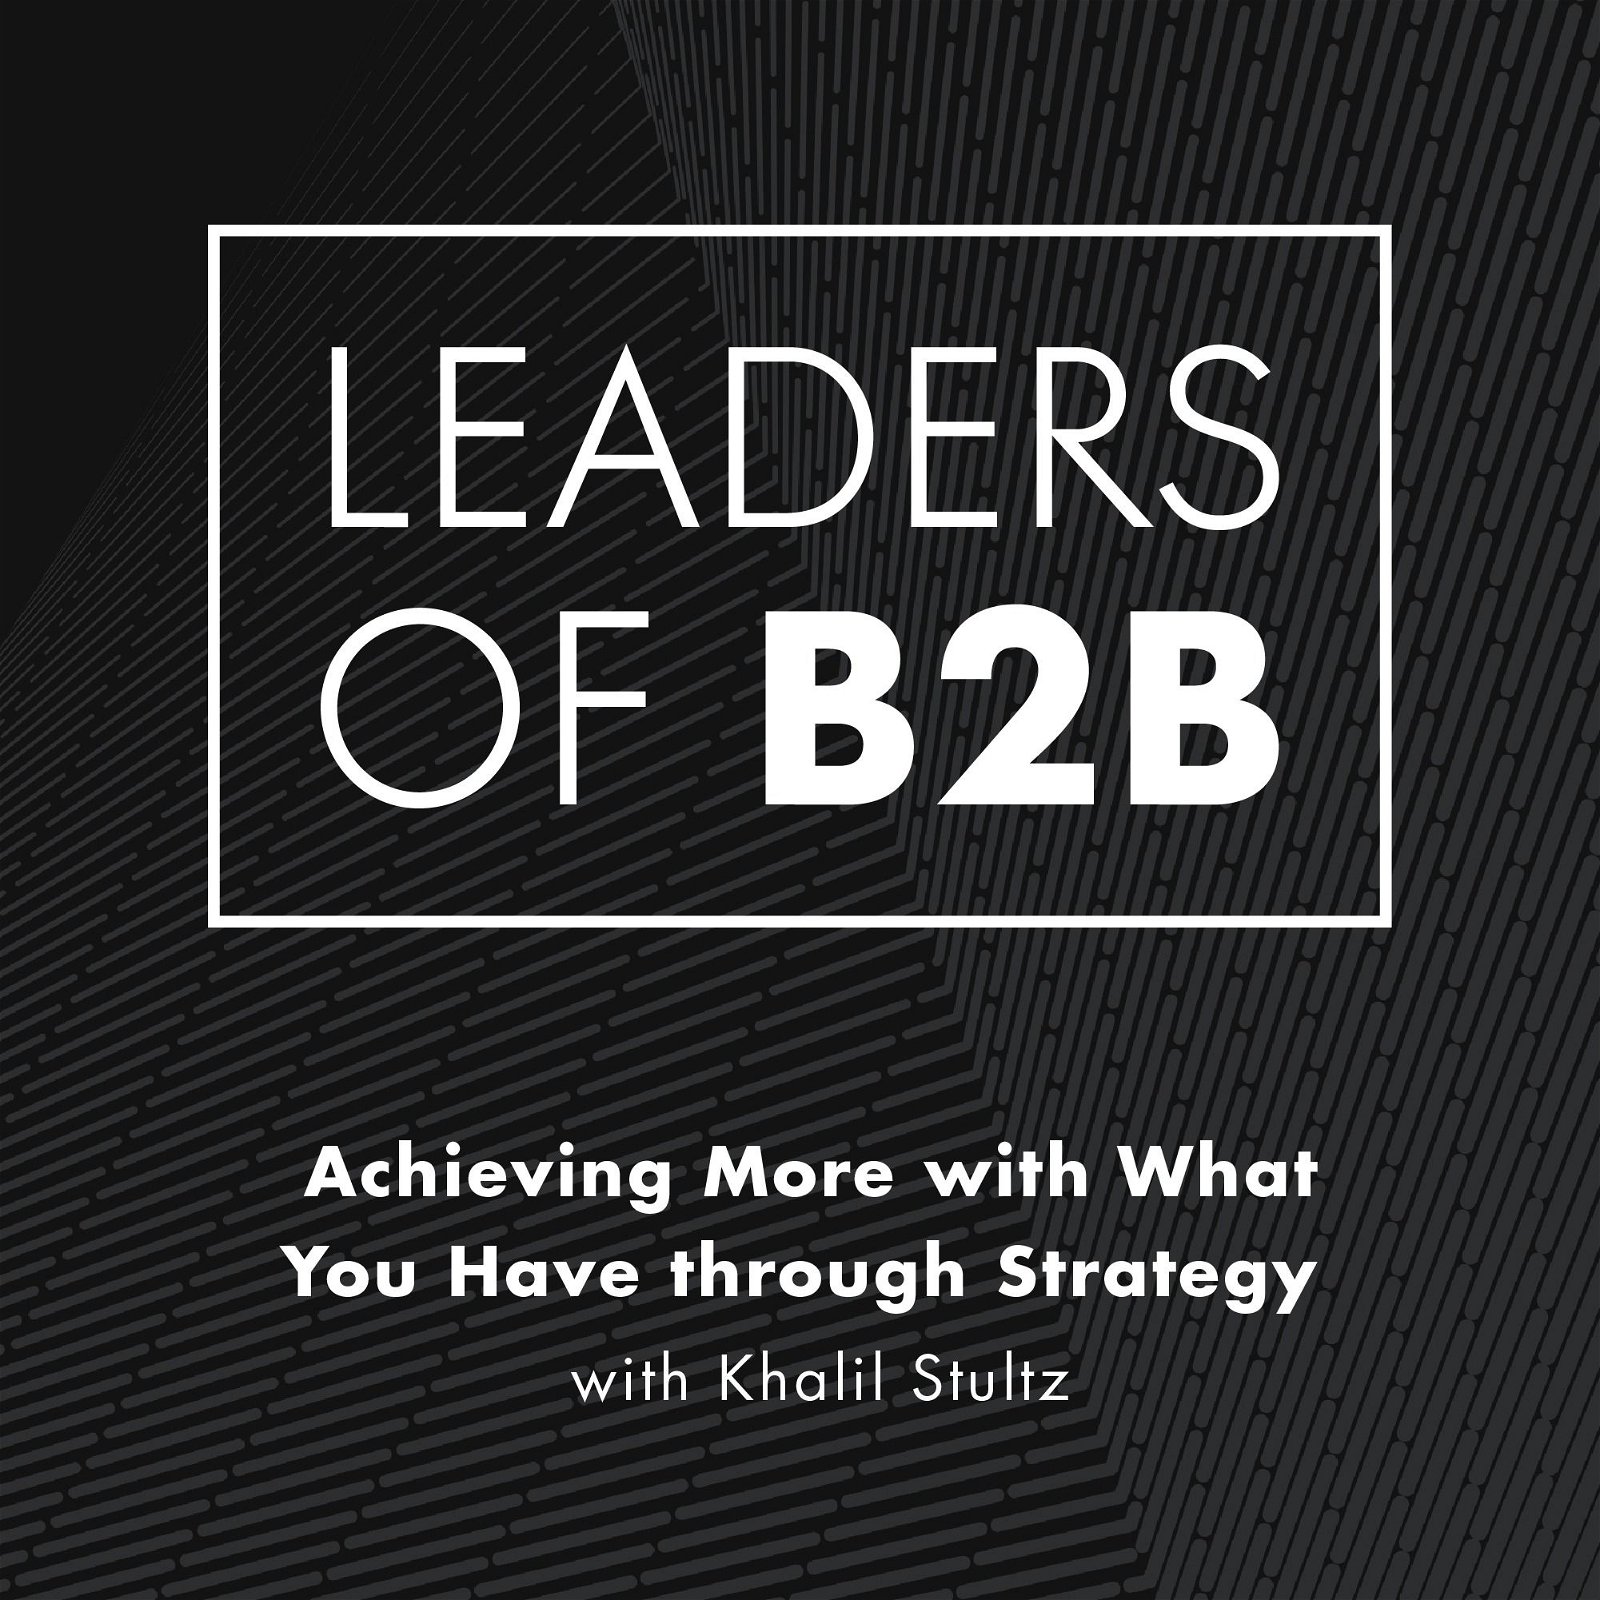 Achieving More with What You Have through Strategy, with Khalil Stultz